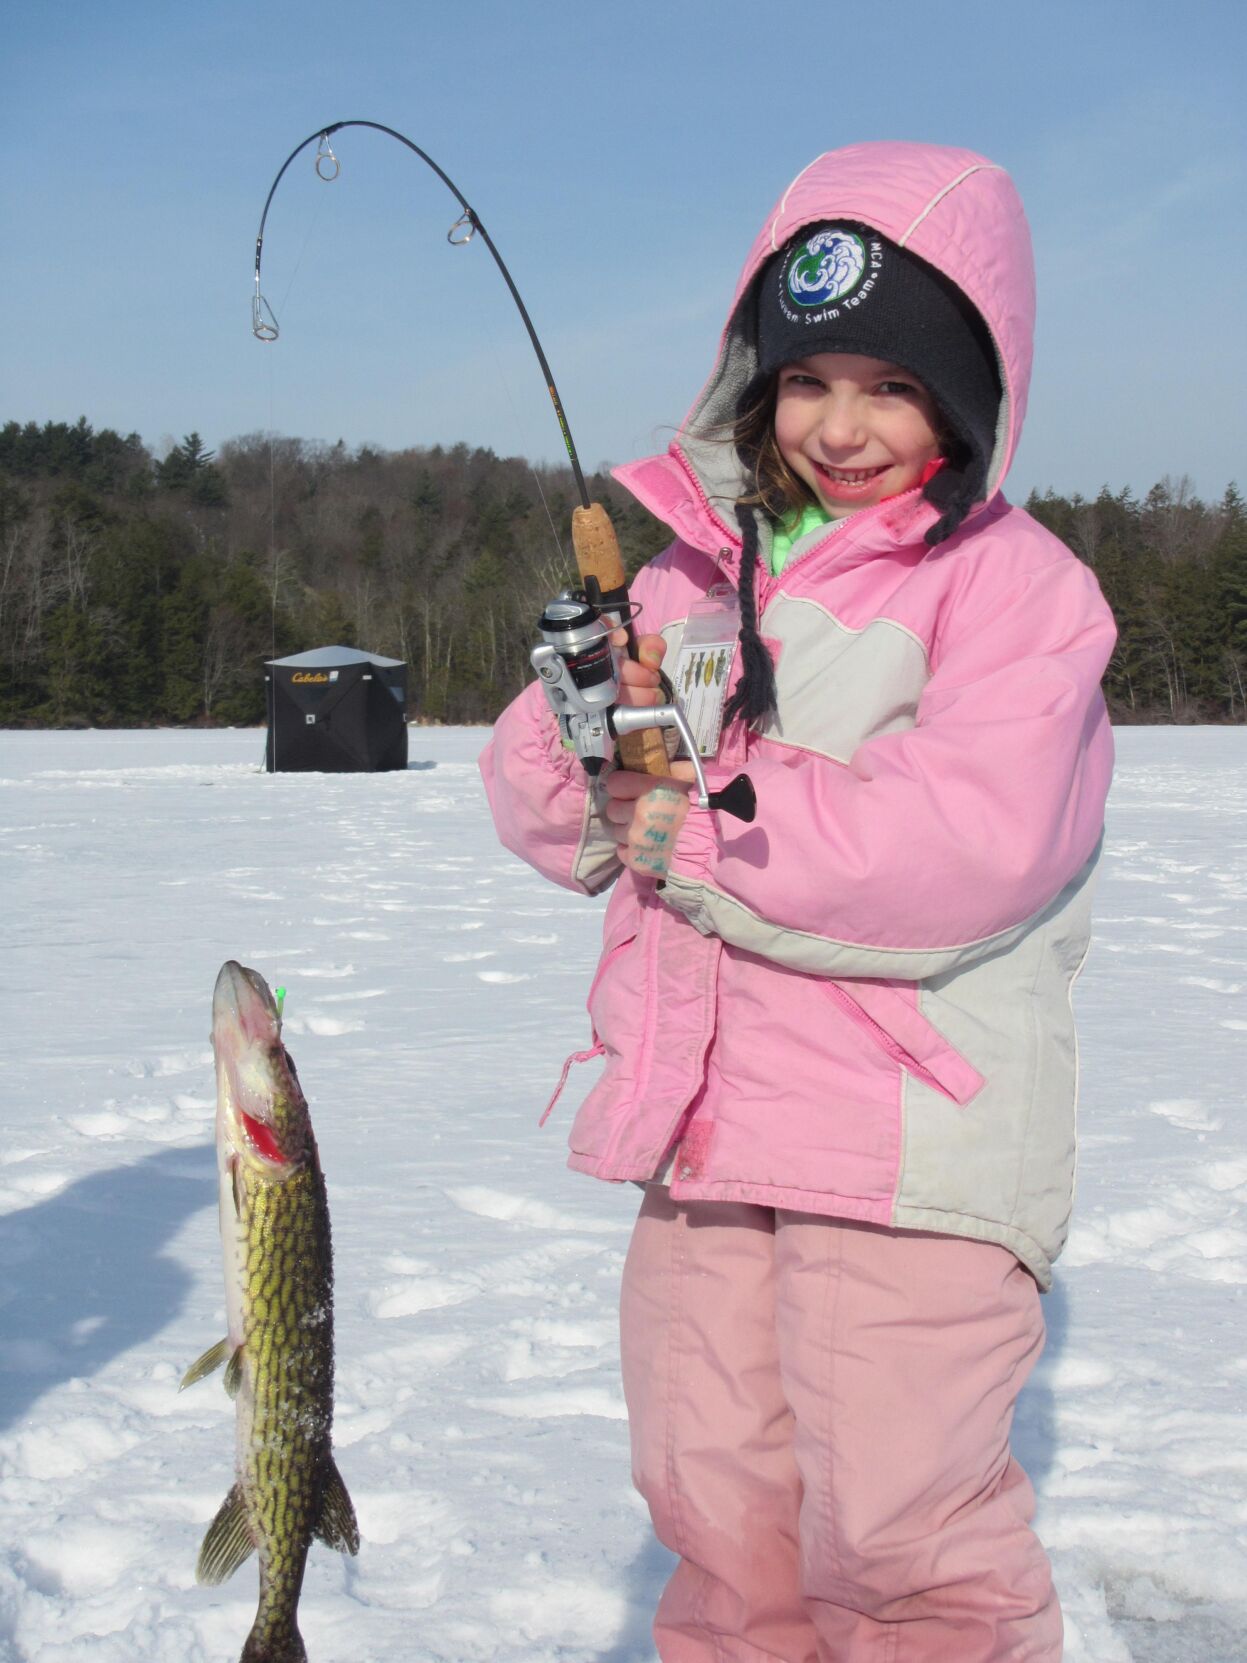 Ice fishing in Connecticut is a cool cure for cabin fever